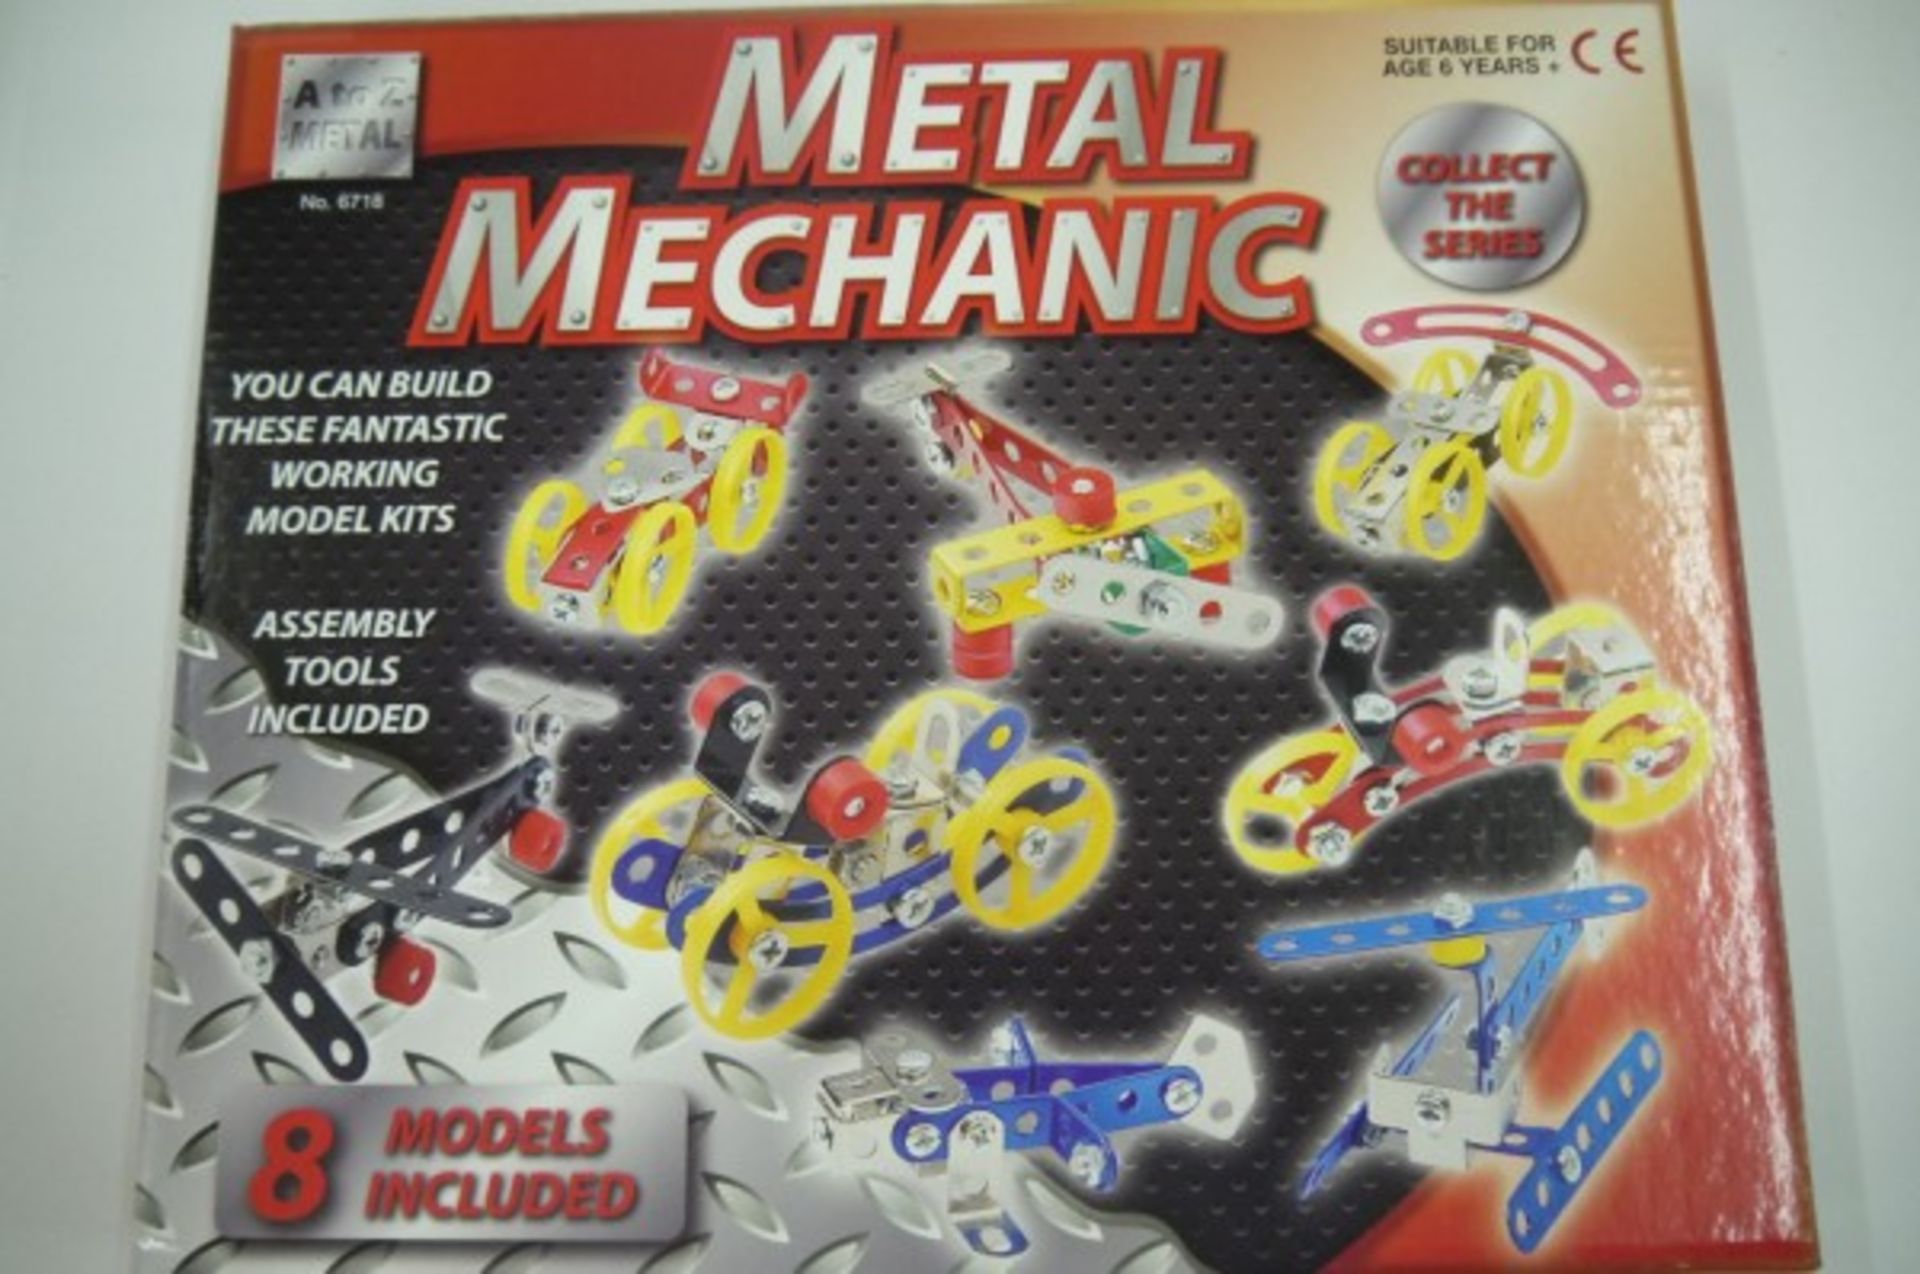 V *TRADE QTY* Brand New Meccano Type Construction Kit Makes 8 Models (Includes Tools) X 8 YOUR BID